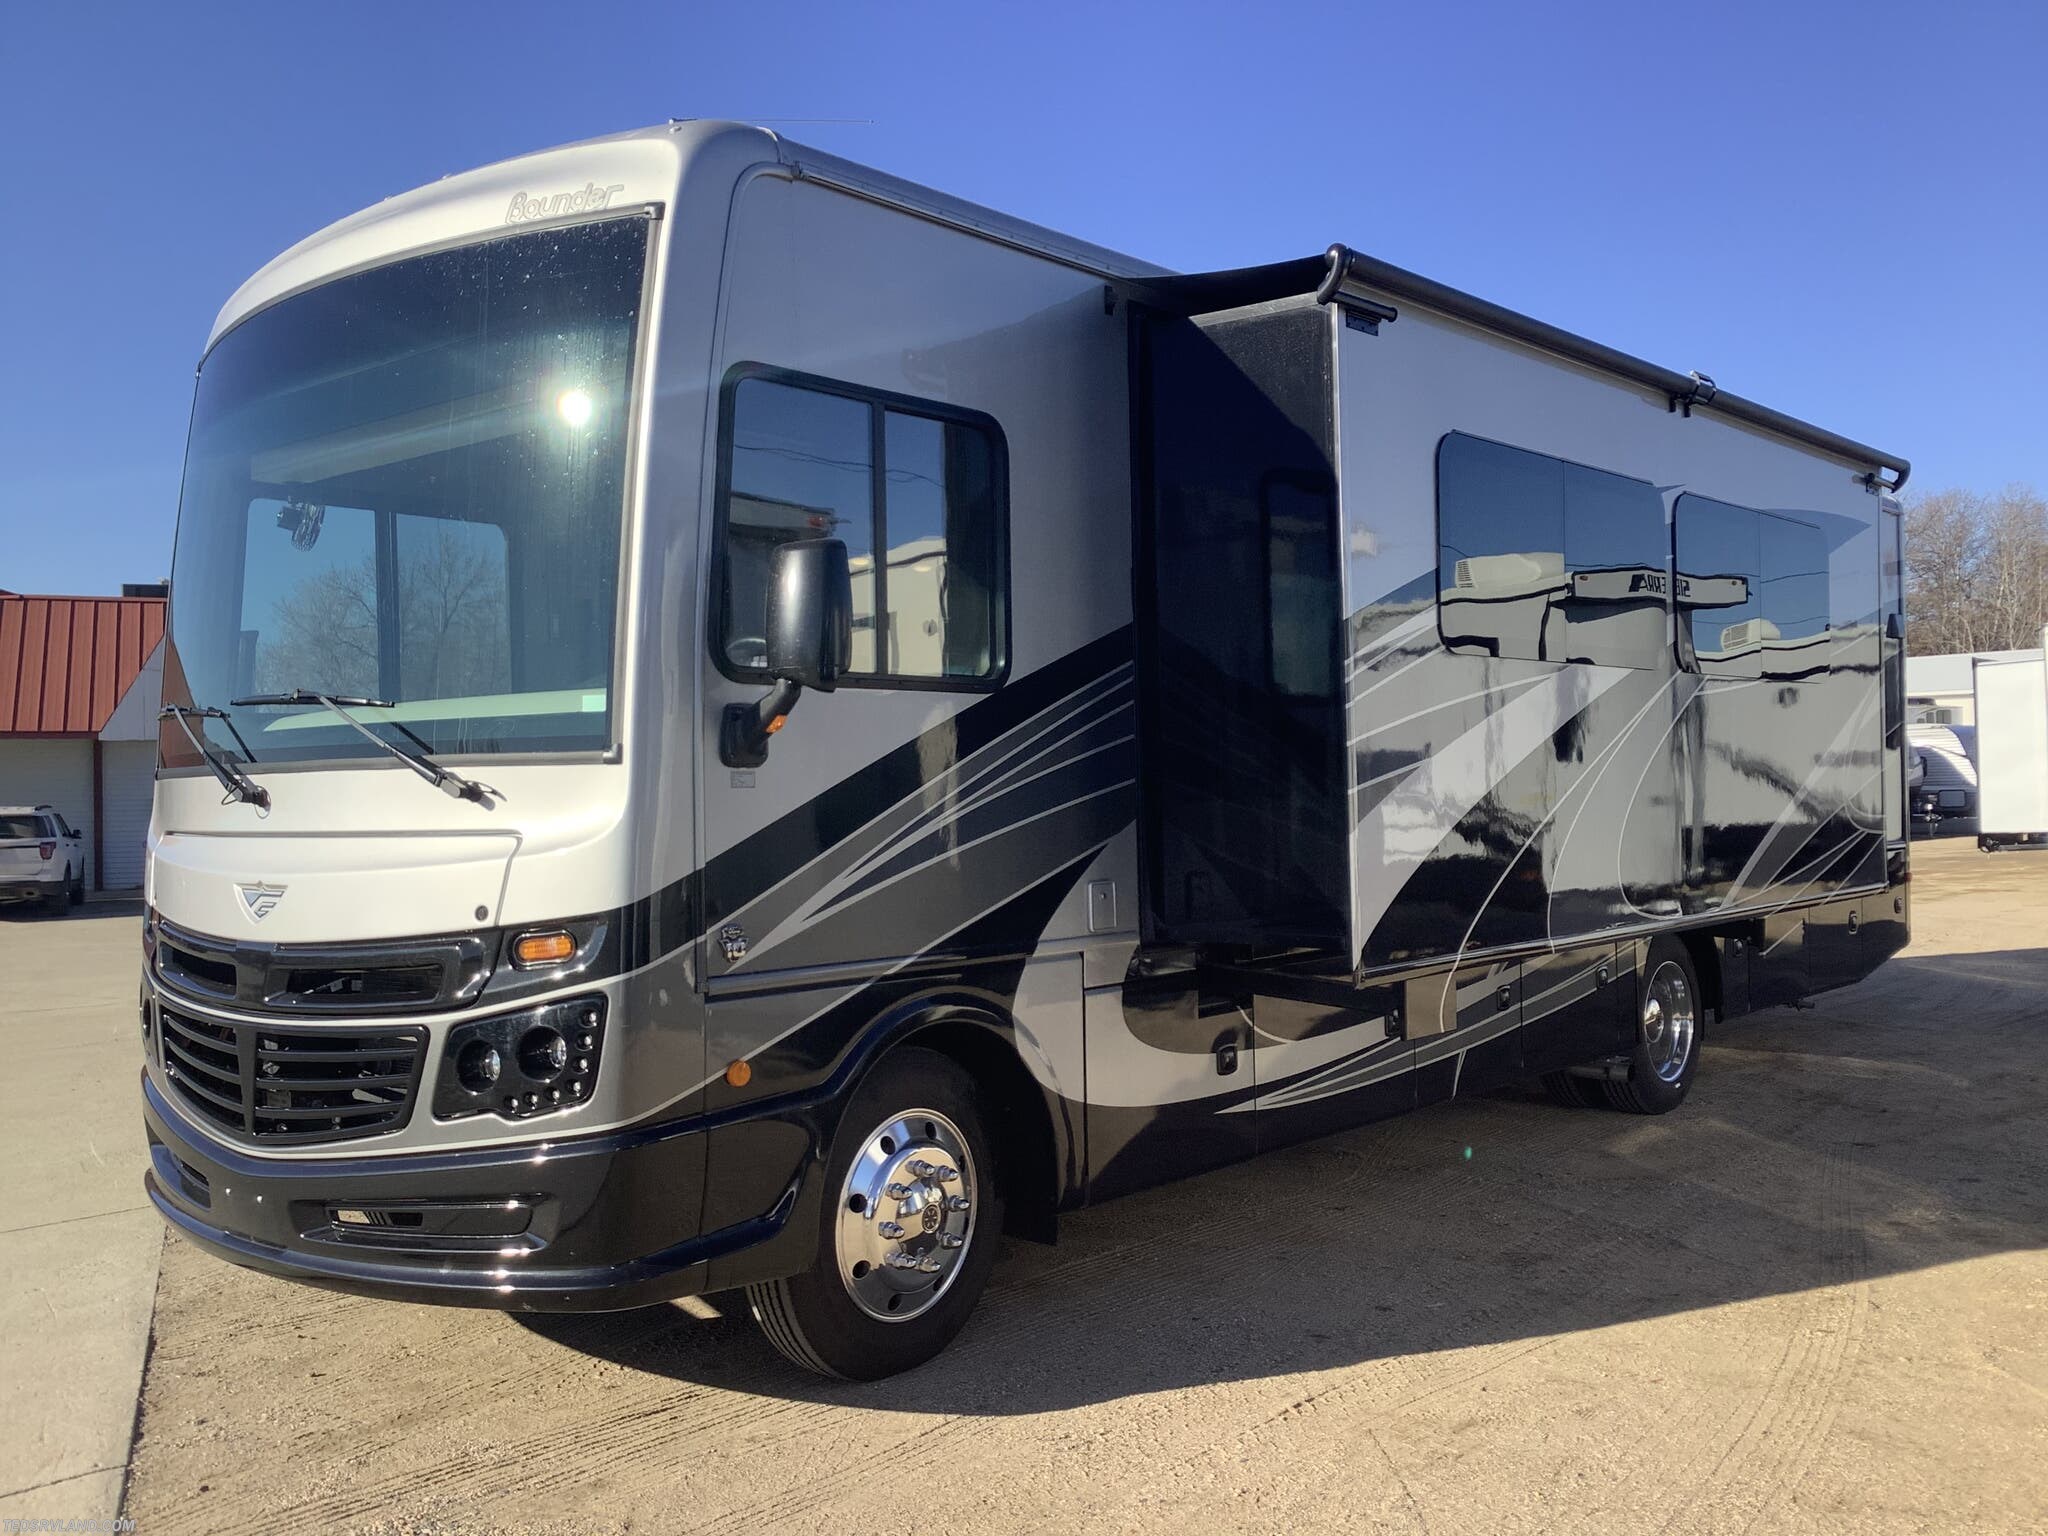 2020 Fleetwood Bounder 33C RV for Sale in Paynesville, MN 56362 ...